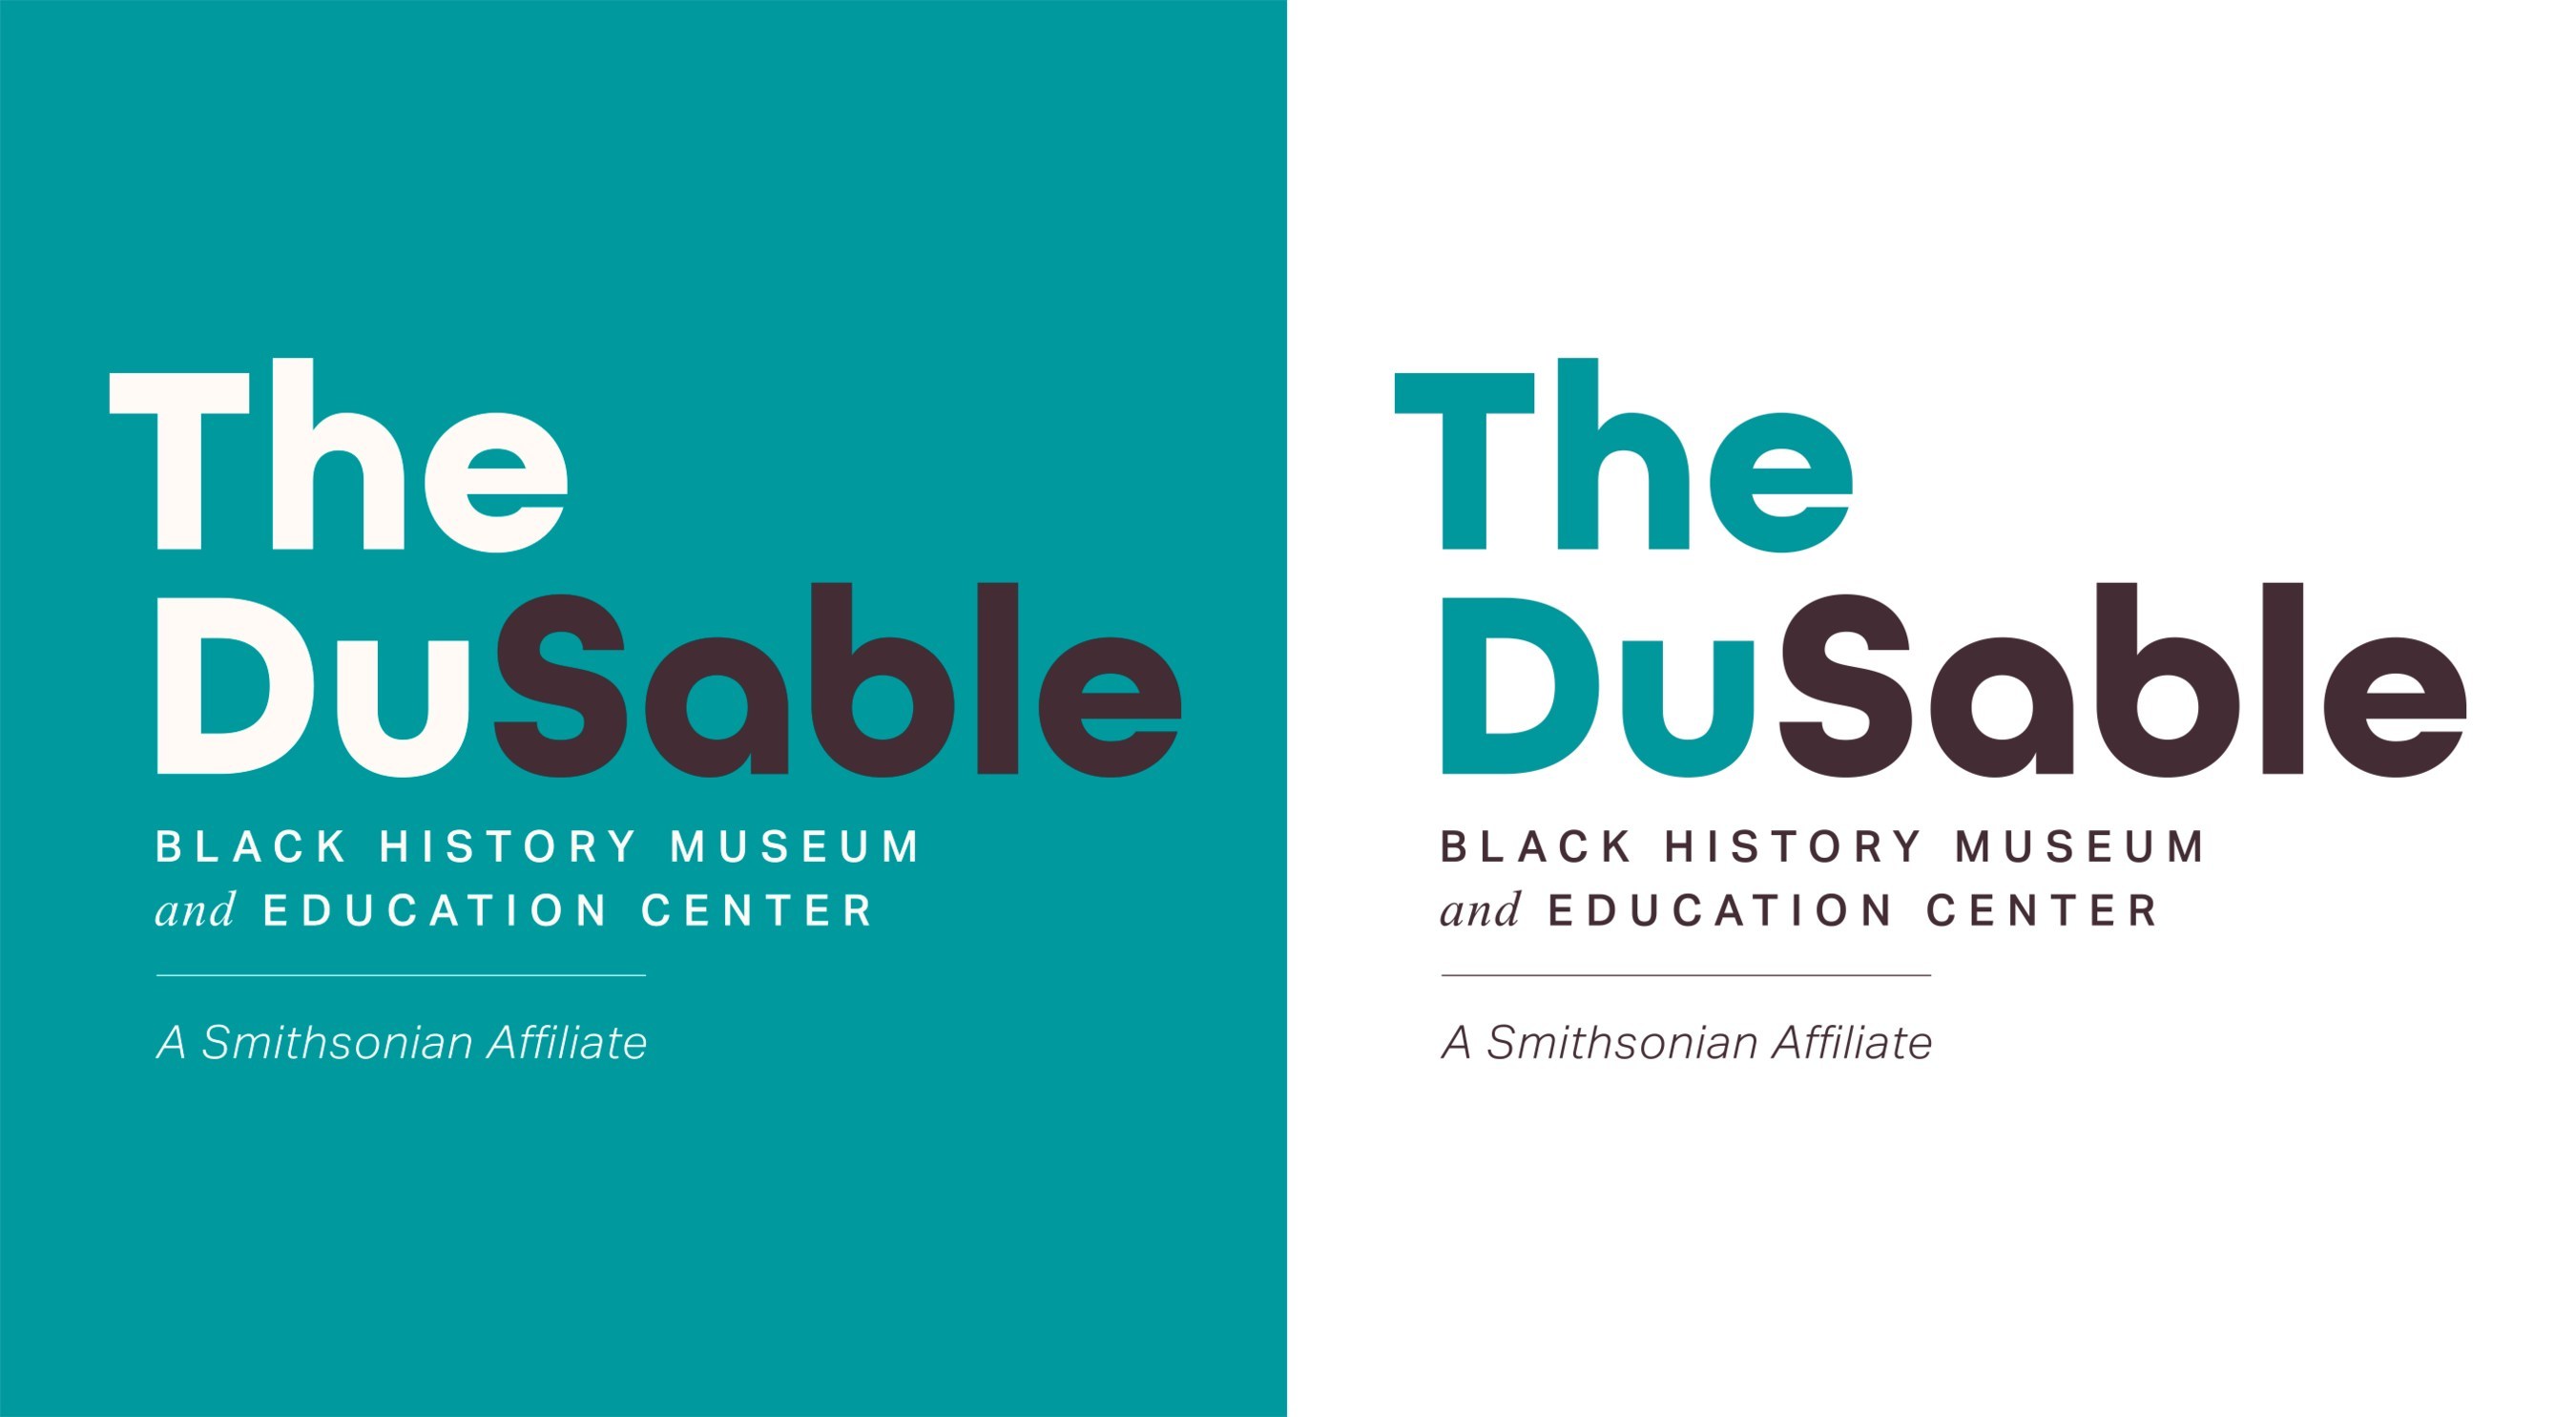 After more than 60 years, the nation’s first independent museum of Black history is entering a new era as The DuSable Black History Museum and Education Center. The new name reaffirms the historic organization’s commitment to educating all people about Black history, culture and experience, and to recognize the global connections and cultures of Black people across the diaspora.